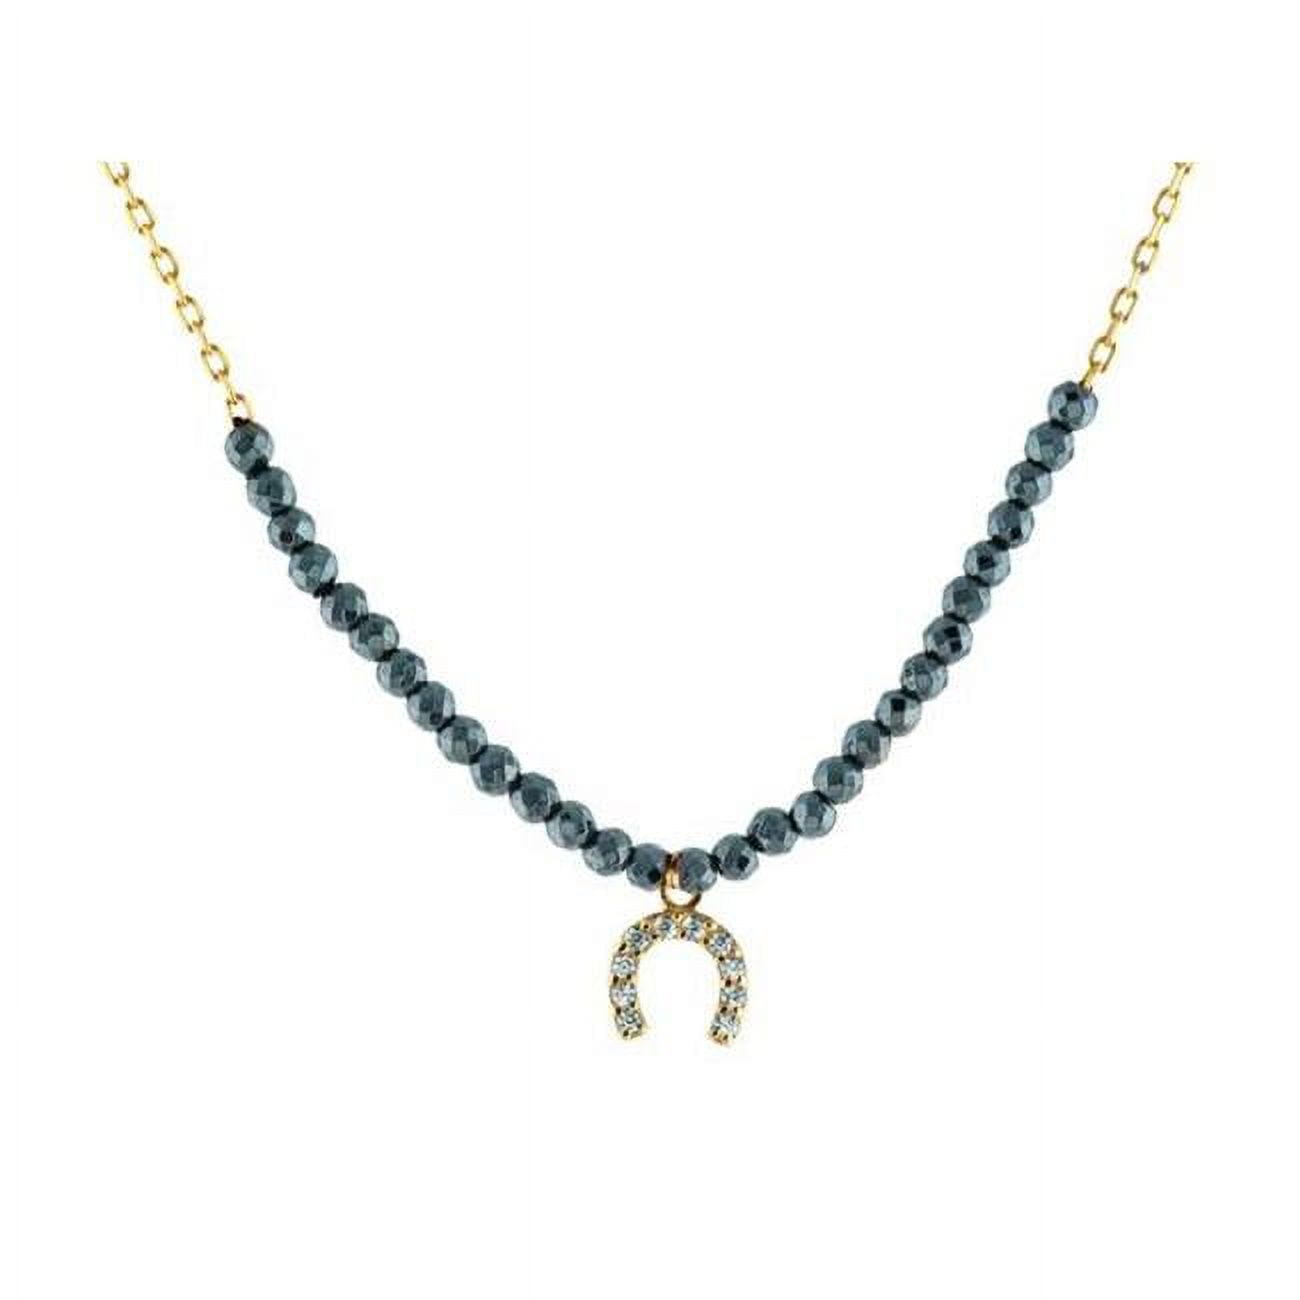 551148h 16 In. Plus 2 In. Extension Horseshoe Necklace With Natural Hematite In Sterling Silver